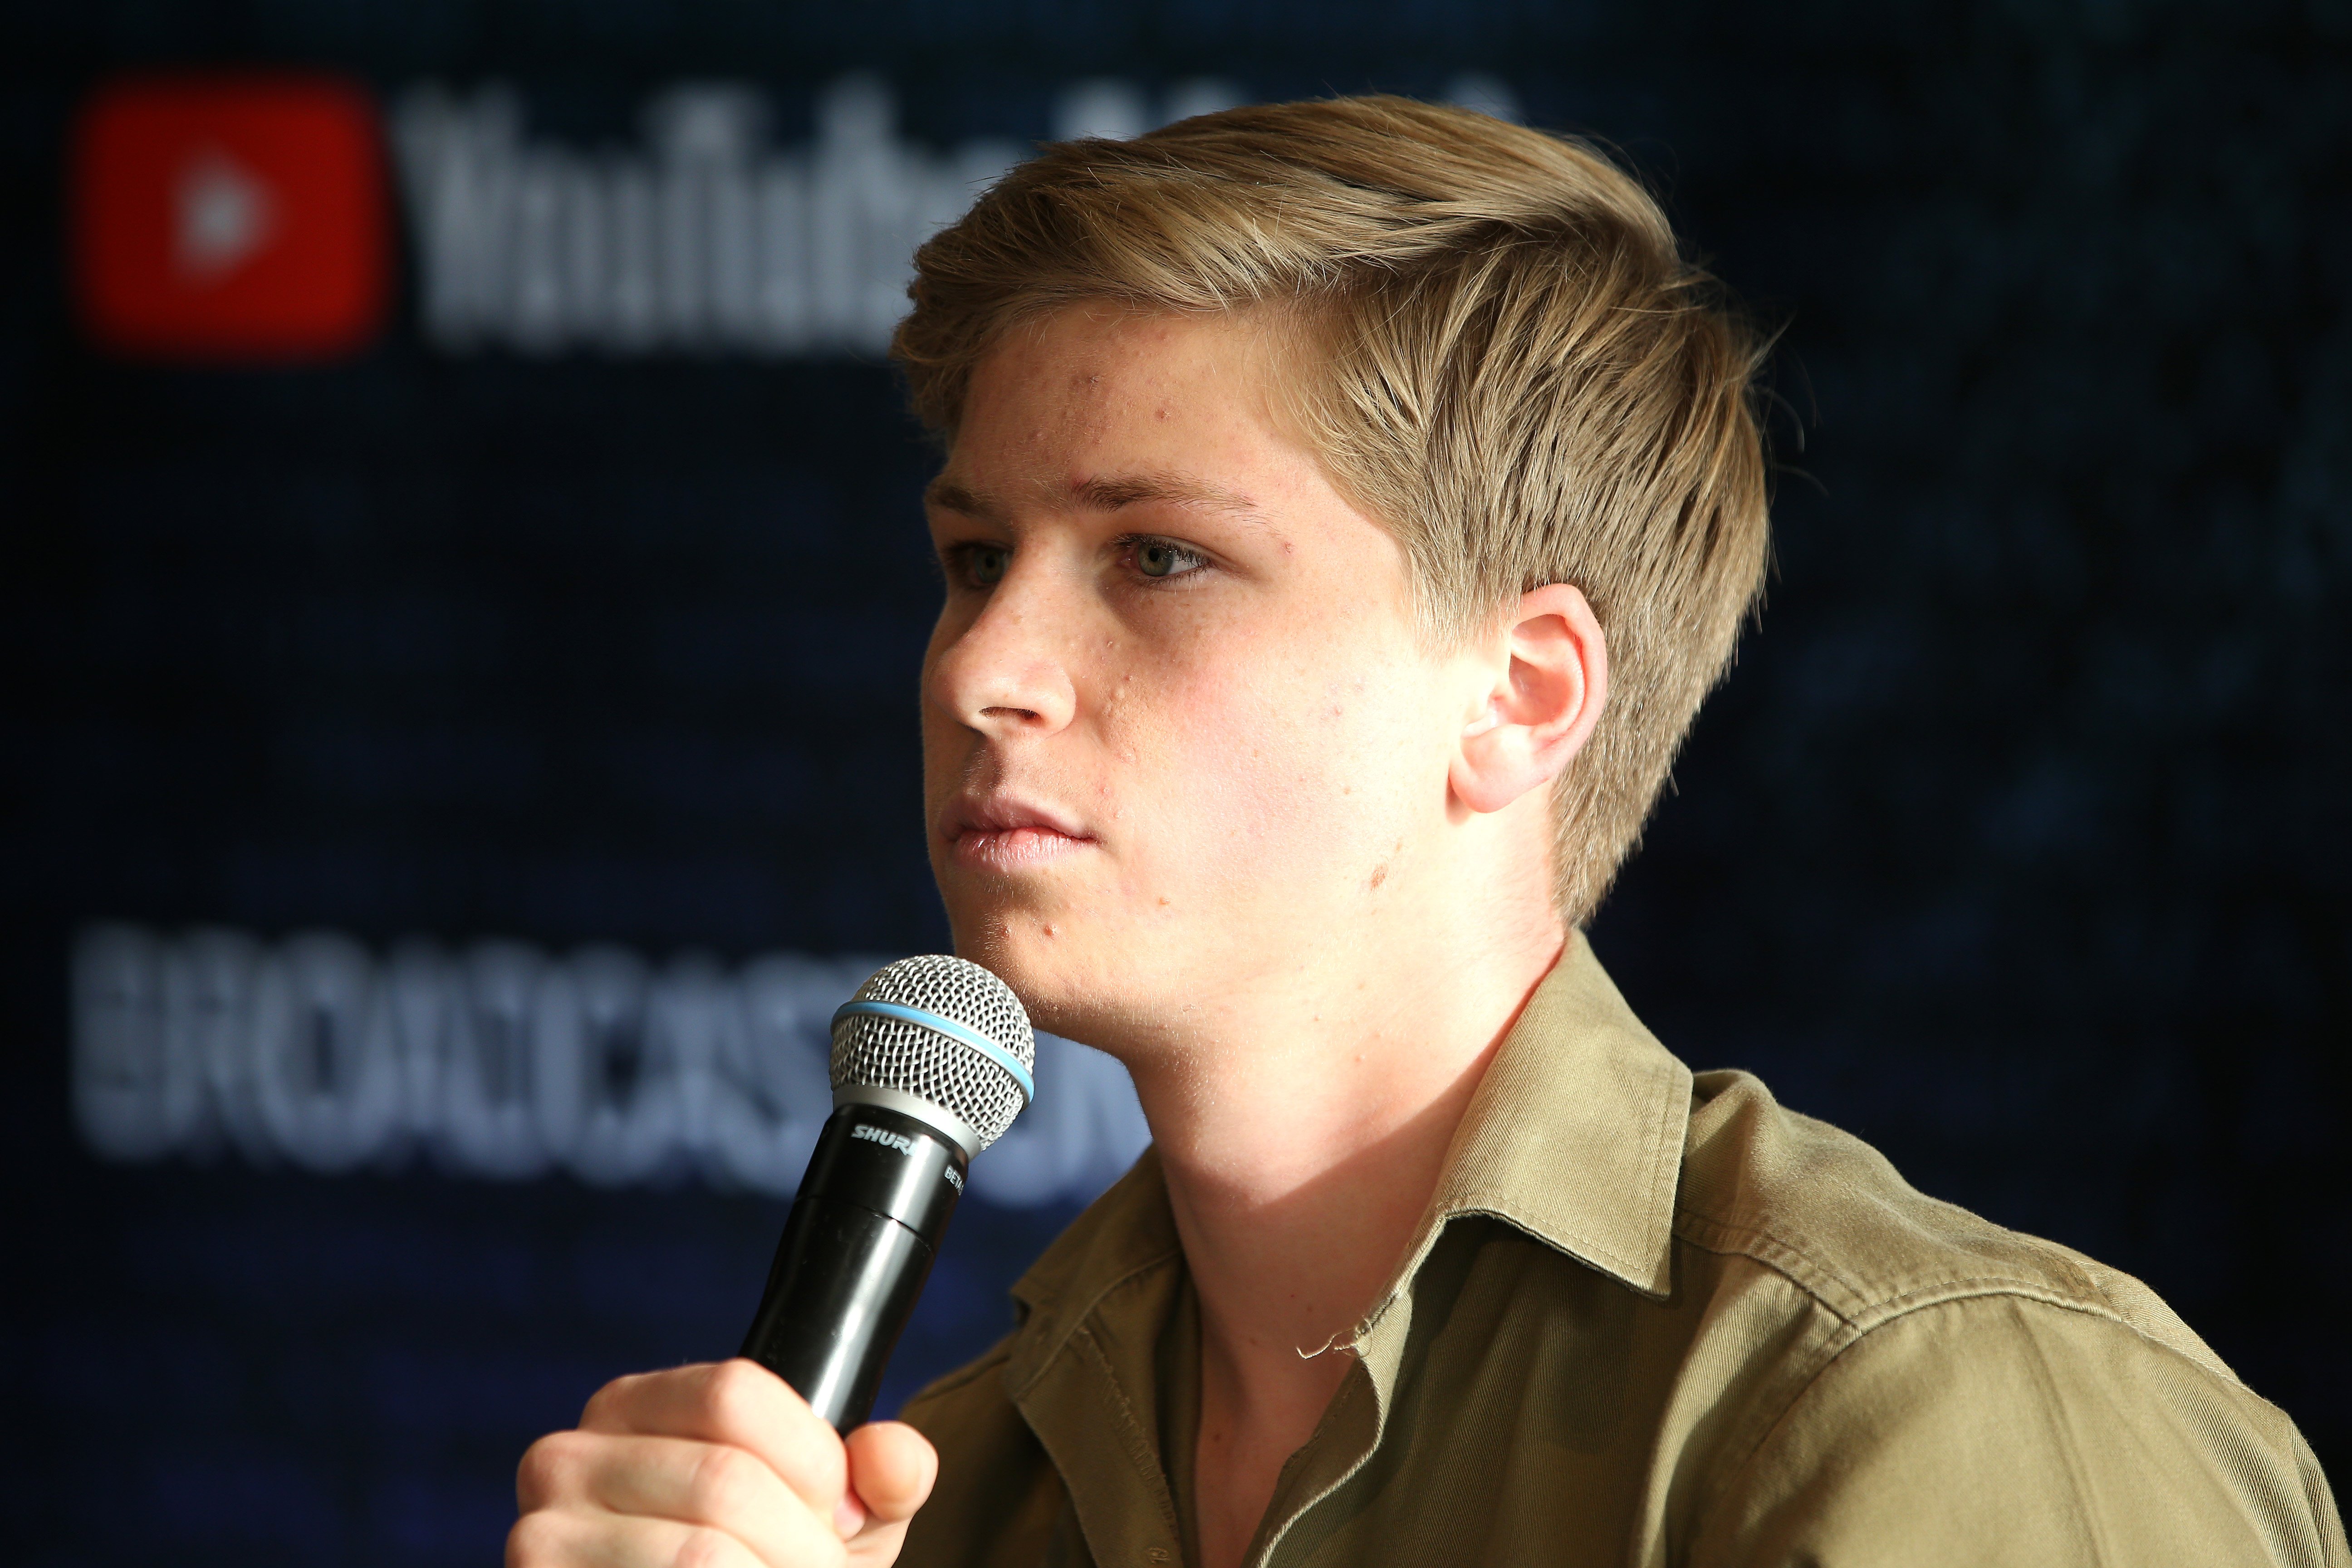 Robert Irwin talks to the media in the awards room during the 33rd Annual ARIA Awards 2019 at The Star on November 27, 2019 in Sydney, Australia | Photo: Getty Images